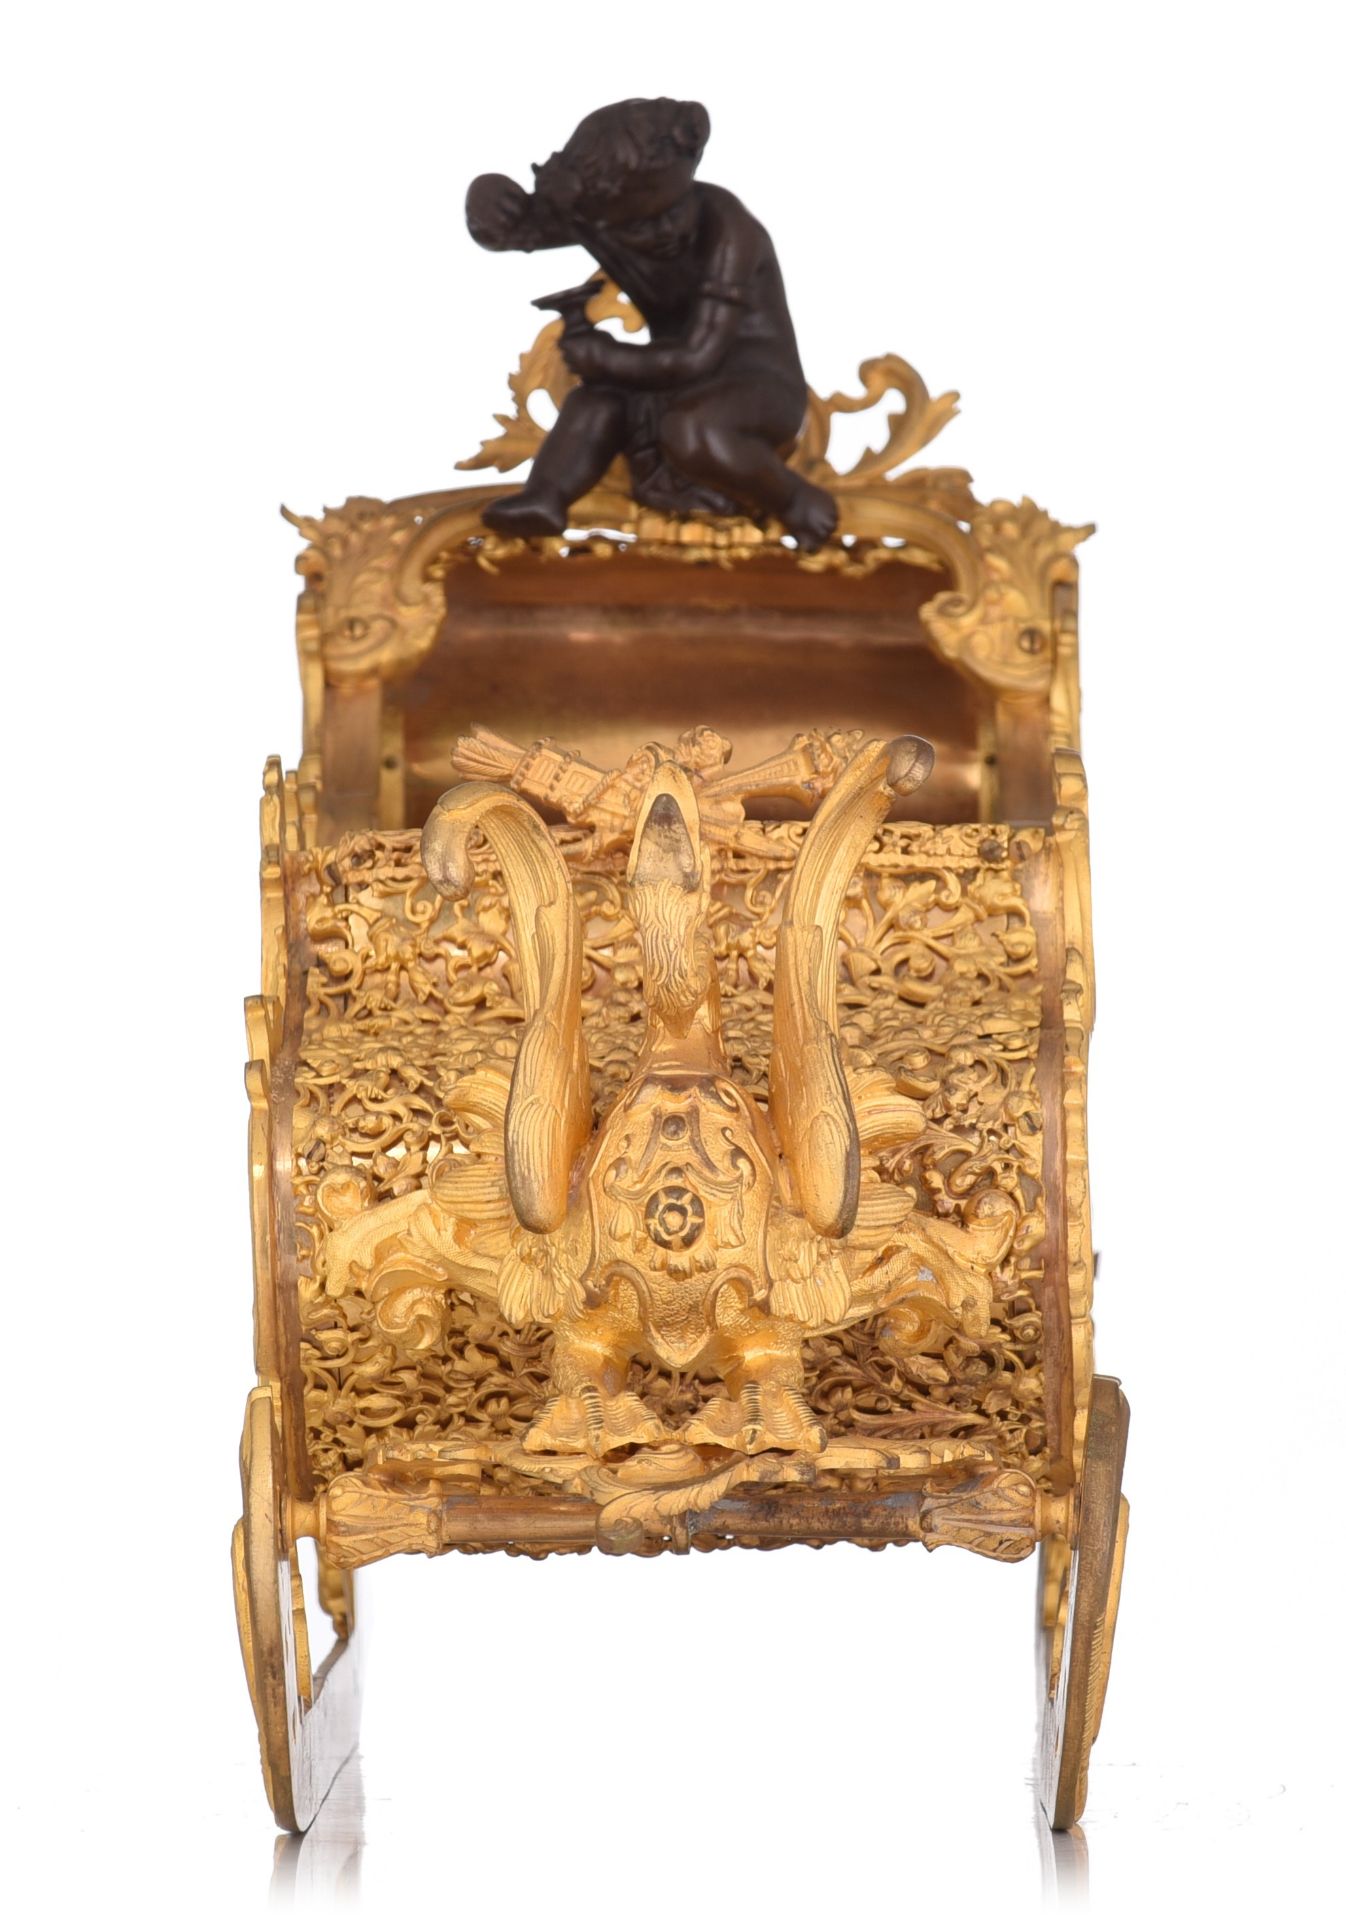 A fine gilt and patinated bronze Russian Rococo style miniature sledge, with onyx plaques, H 31 - W - Image 5 of 9